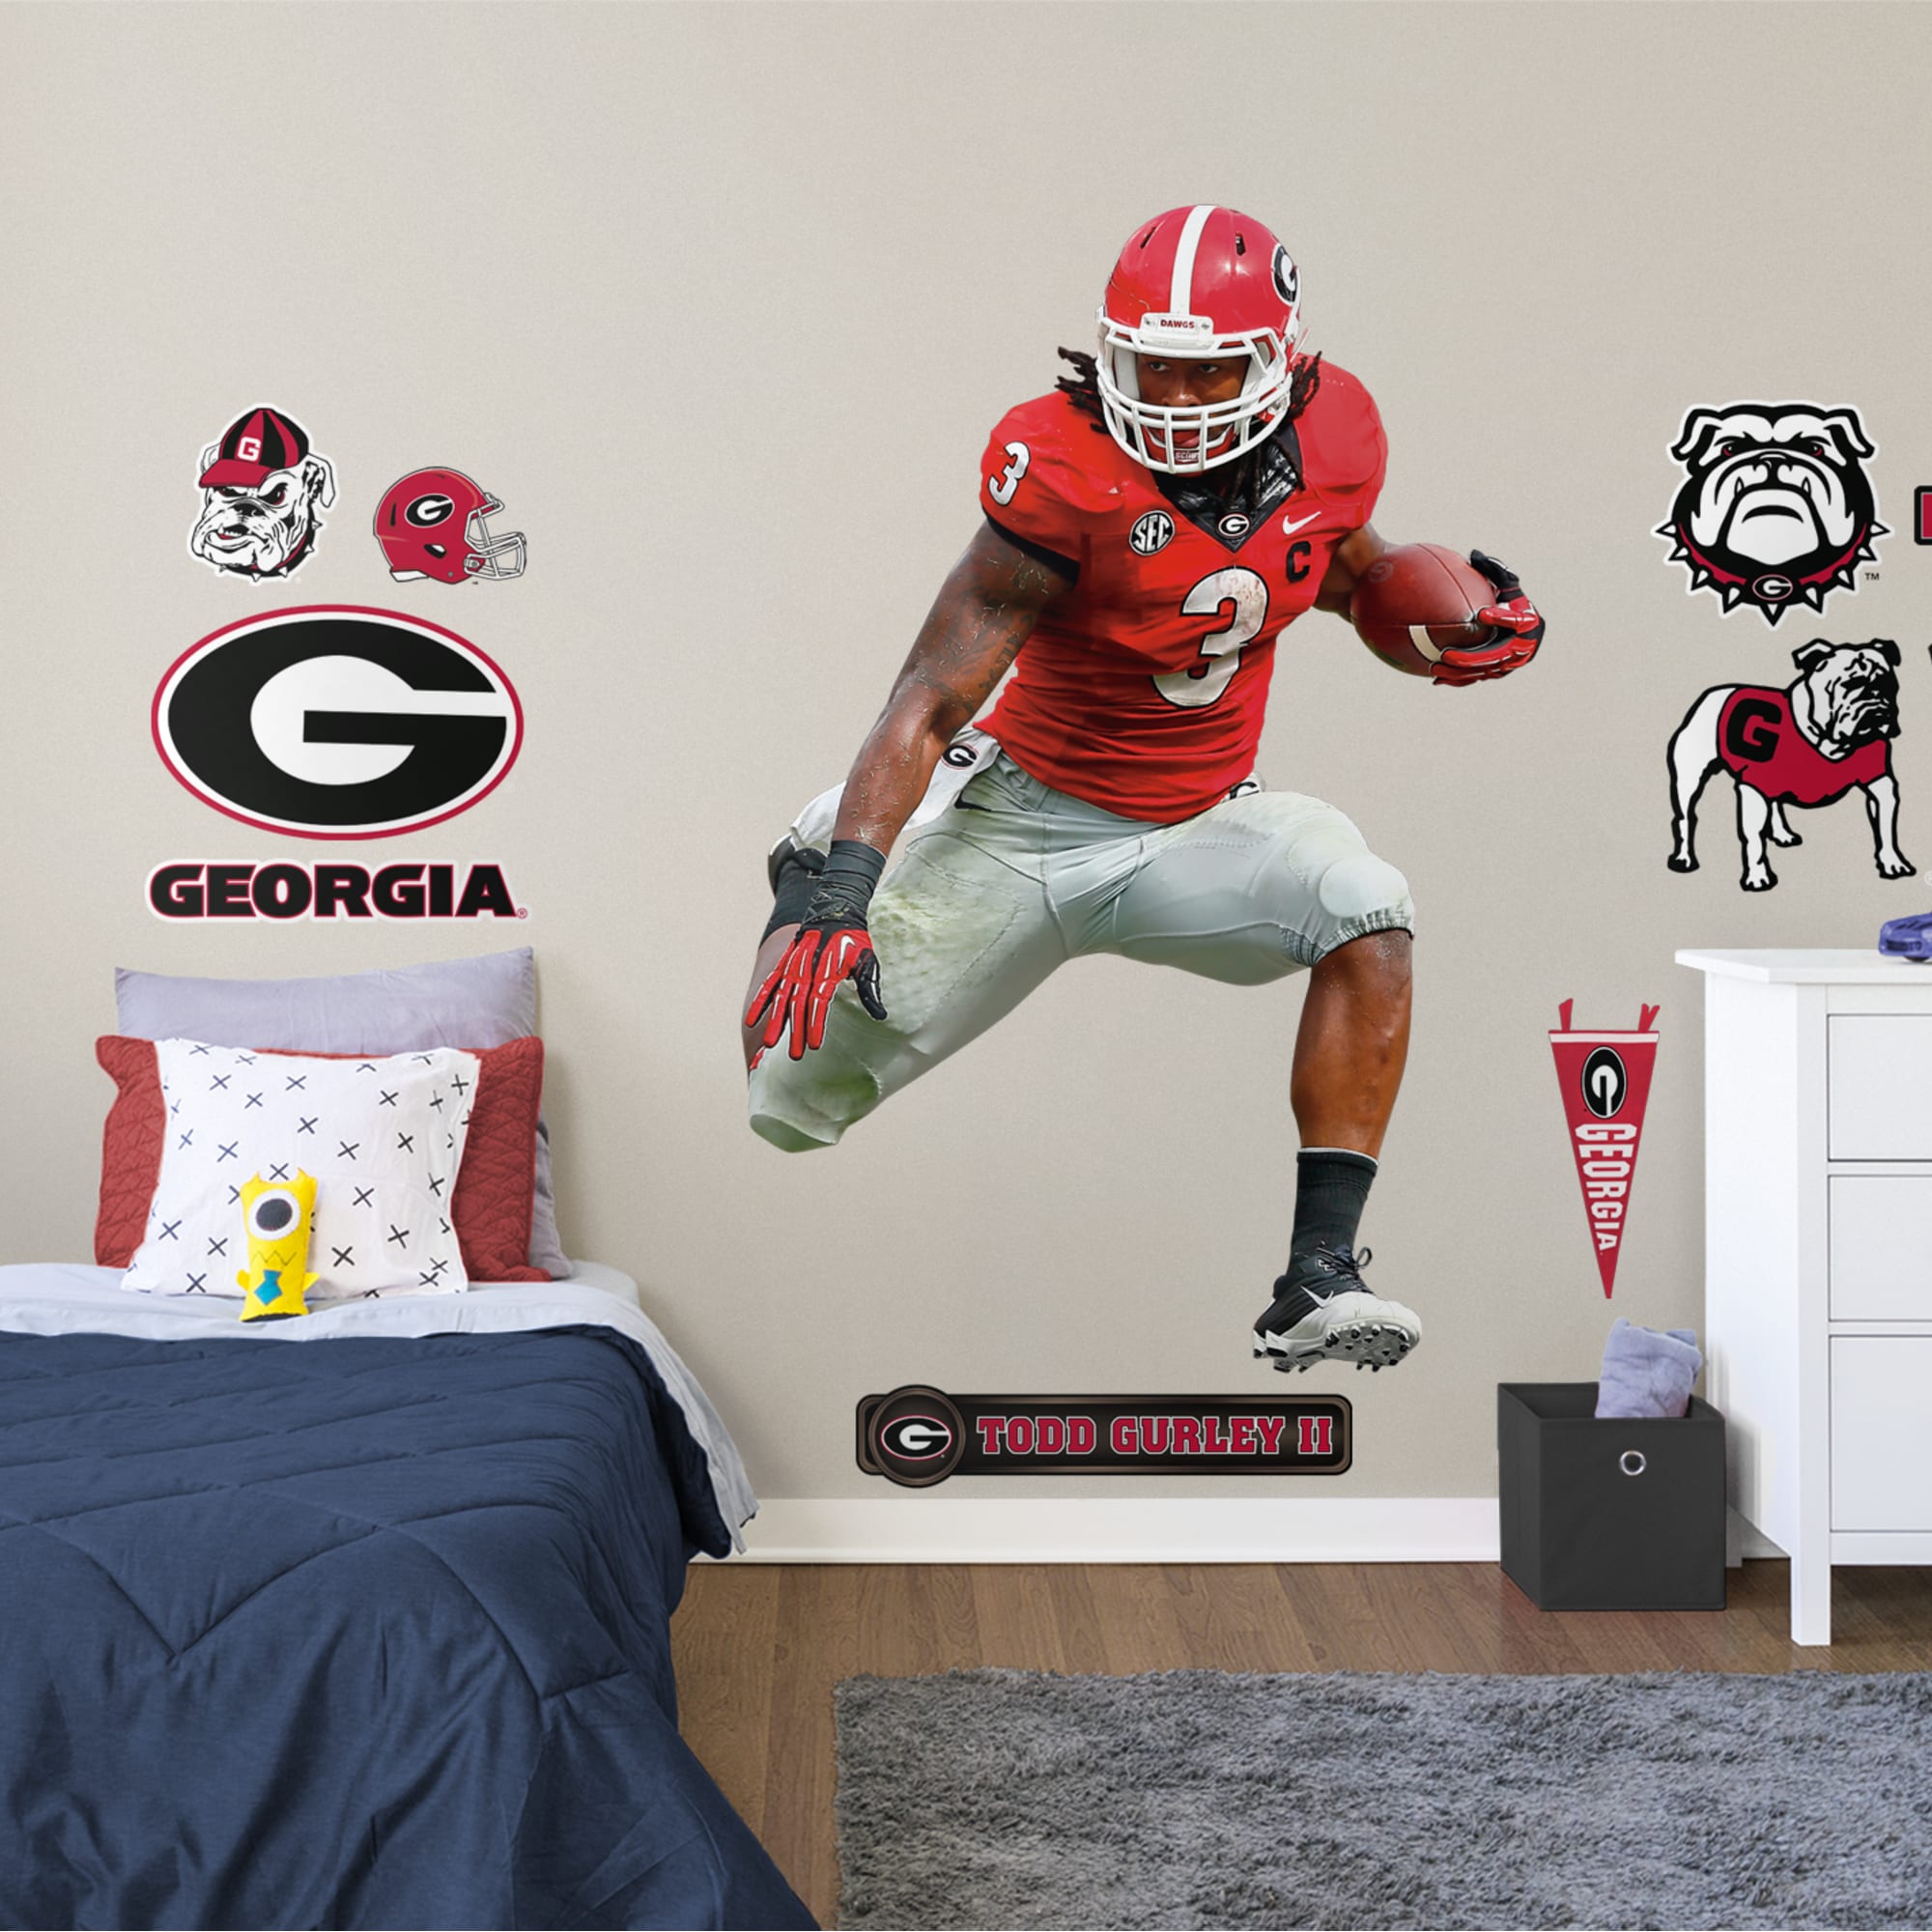 Todd Gurley for Georgia Bulldogs: Georgia - Officially Licensed Removable Wall Decal Life-Size Athlete + 12 Decals (50"W x 72"H)